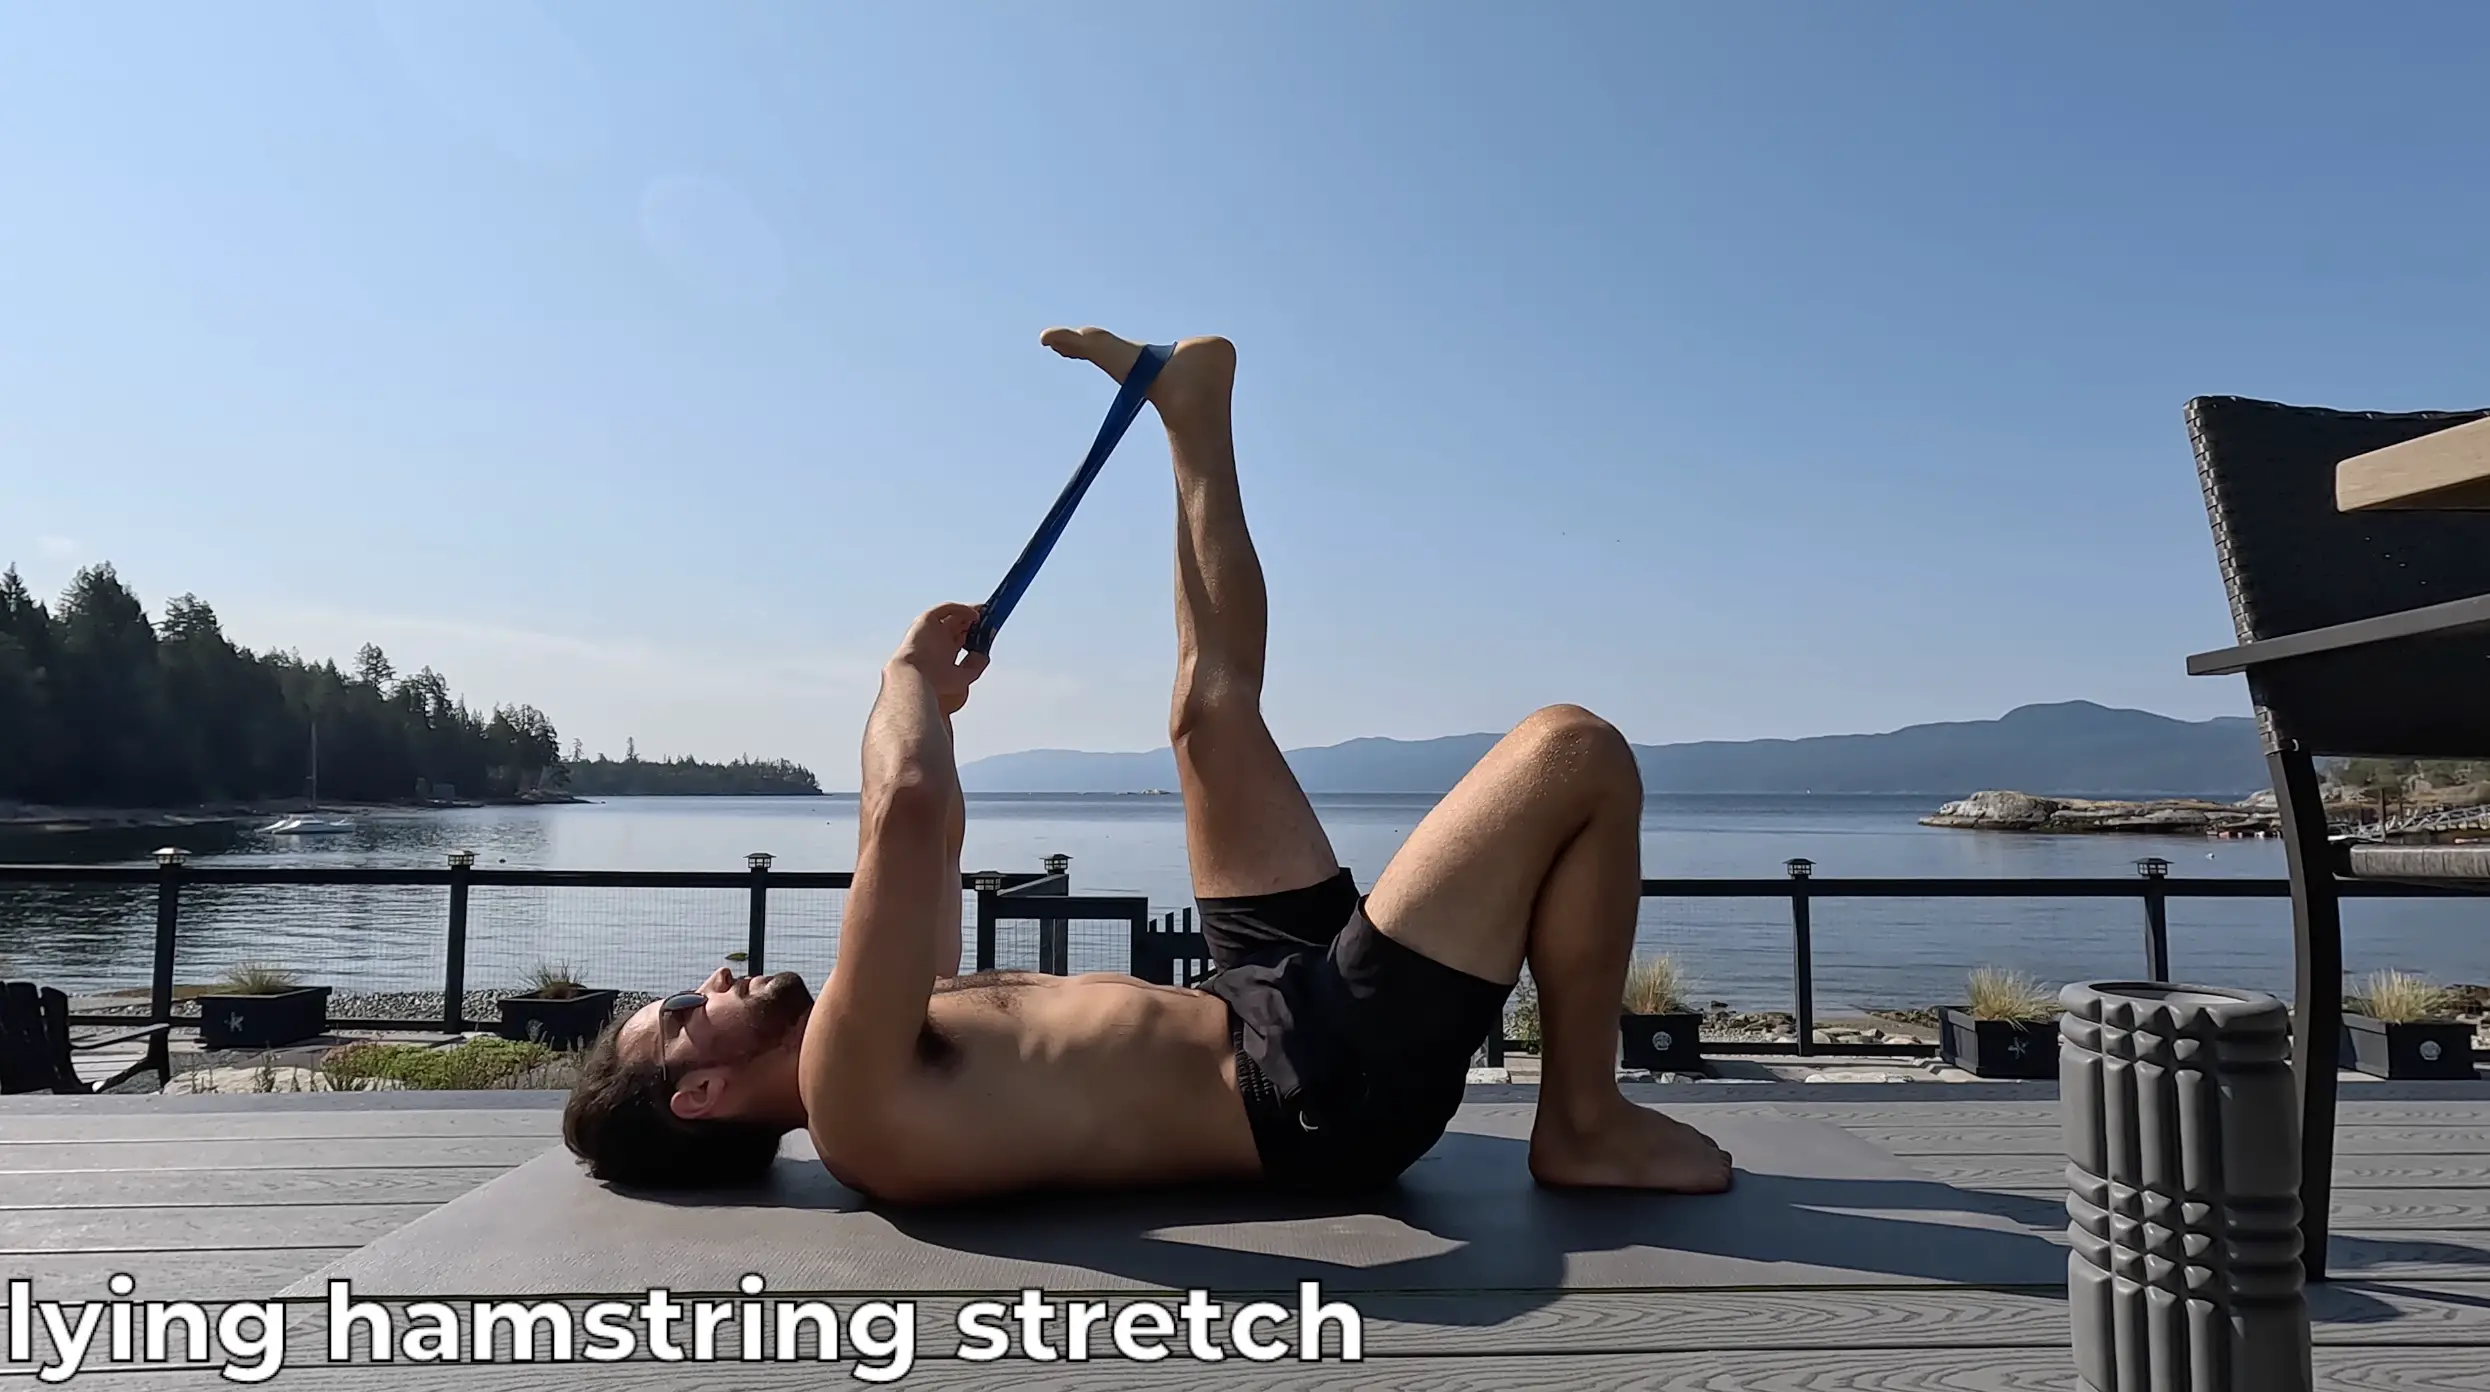 Hamstring Stretch - a great exercise to fix knee pain, strengthen muscles and increase flexibility